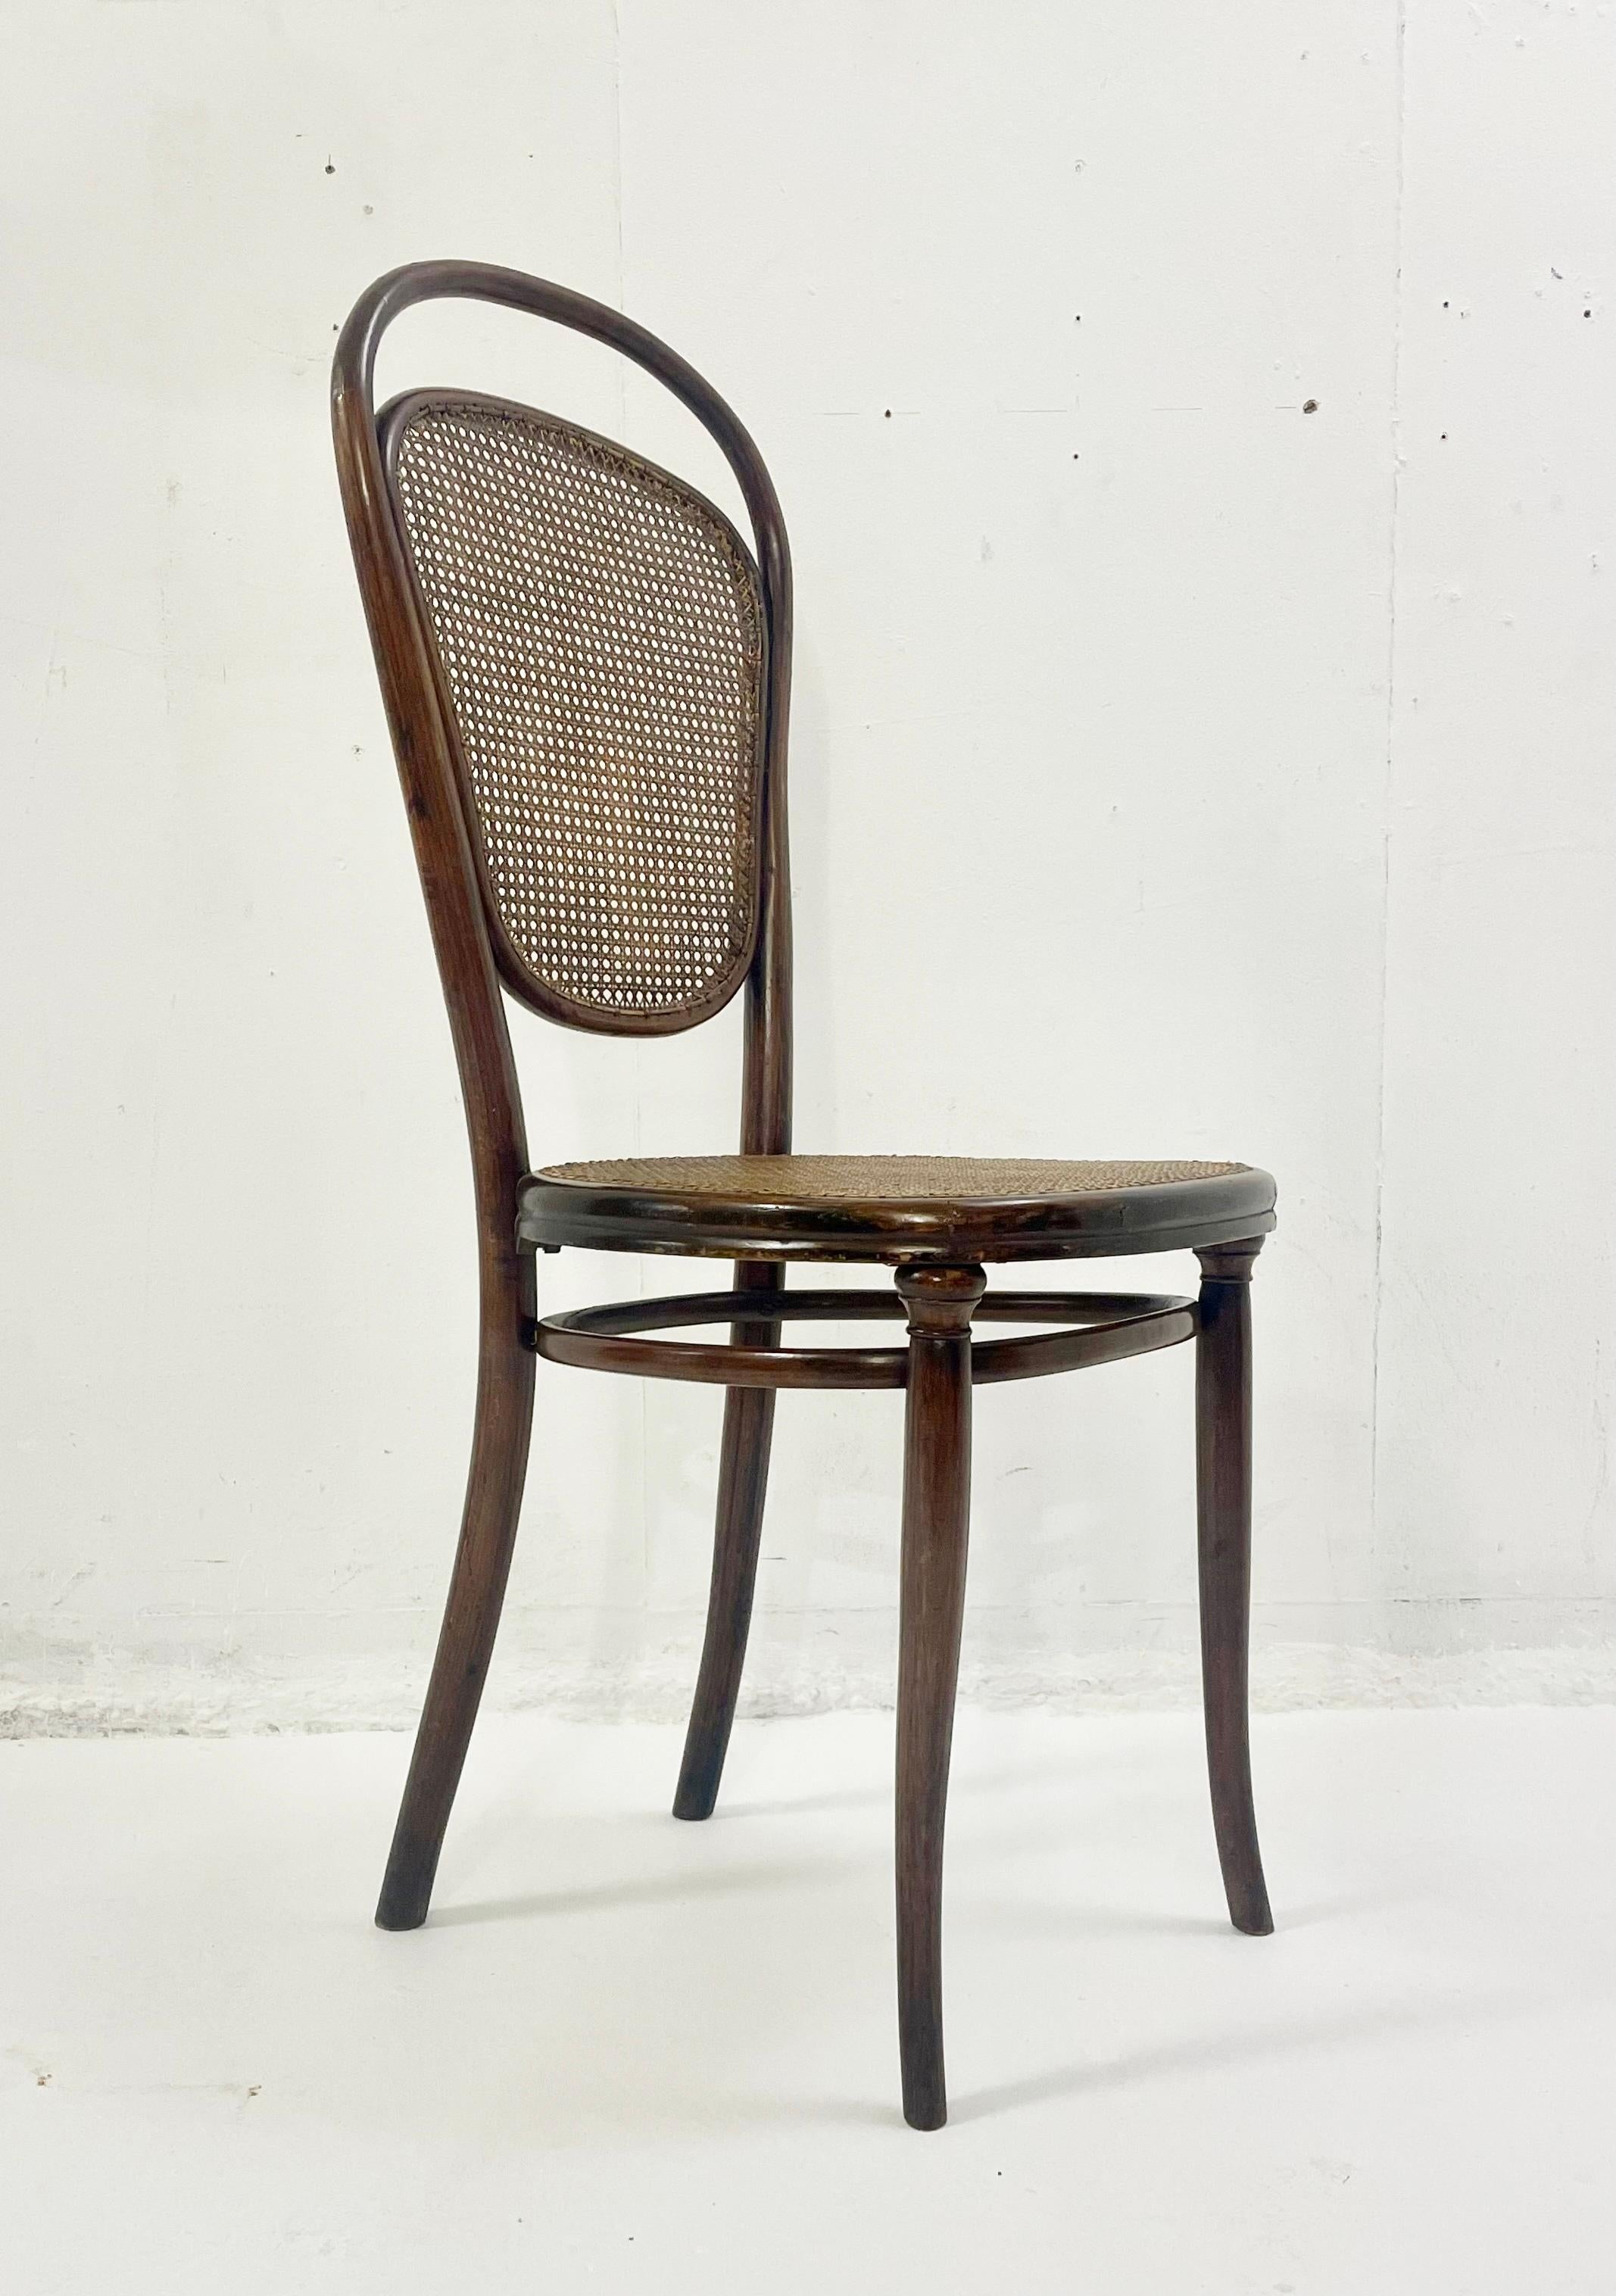 Mid-20th Century Set of 8 Bentwood Caning Chairs by Thonet, Austria 1930s For Sale